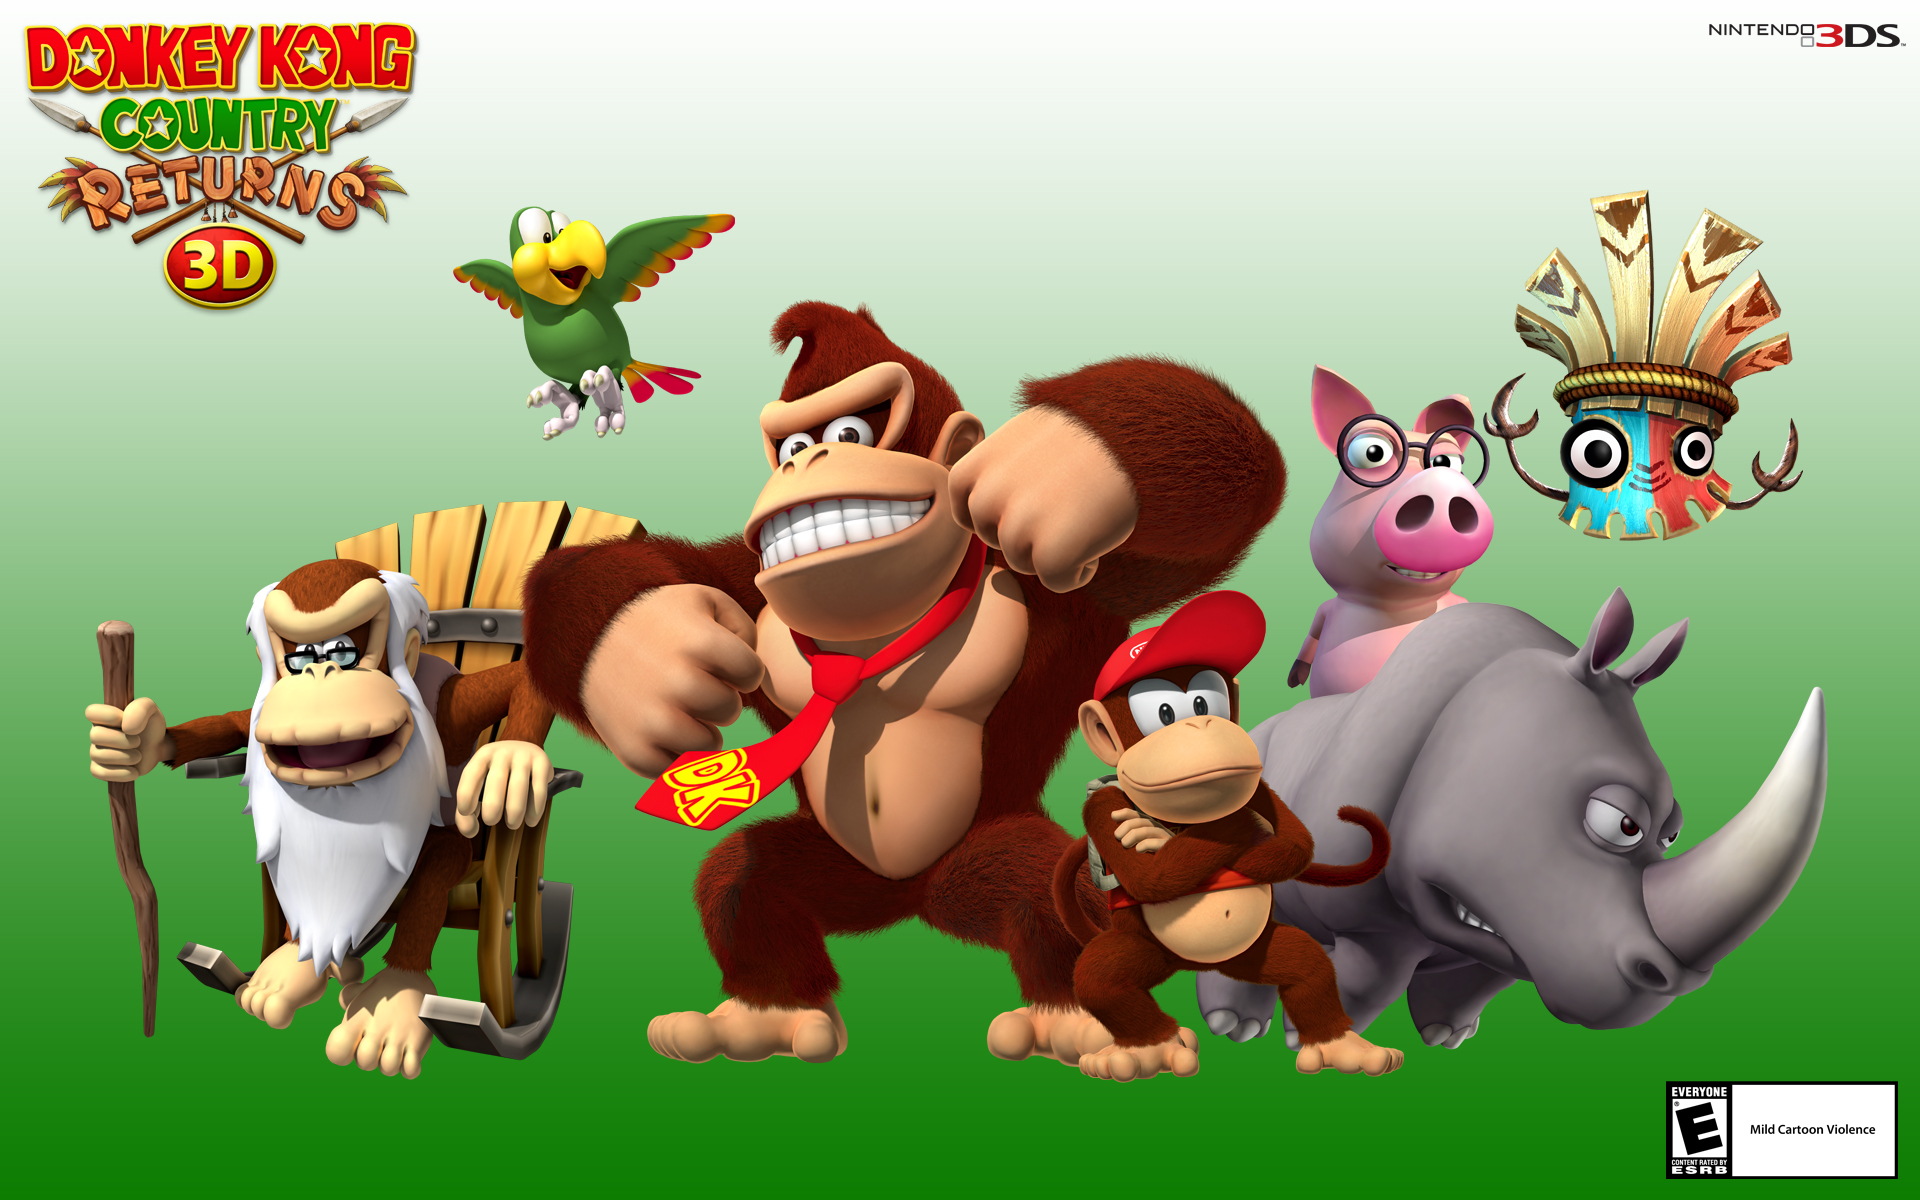 UK Chart: Donkey Kong Country Returns 3D Rolls In At Number 5 - My Nintendo  News